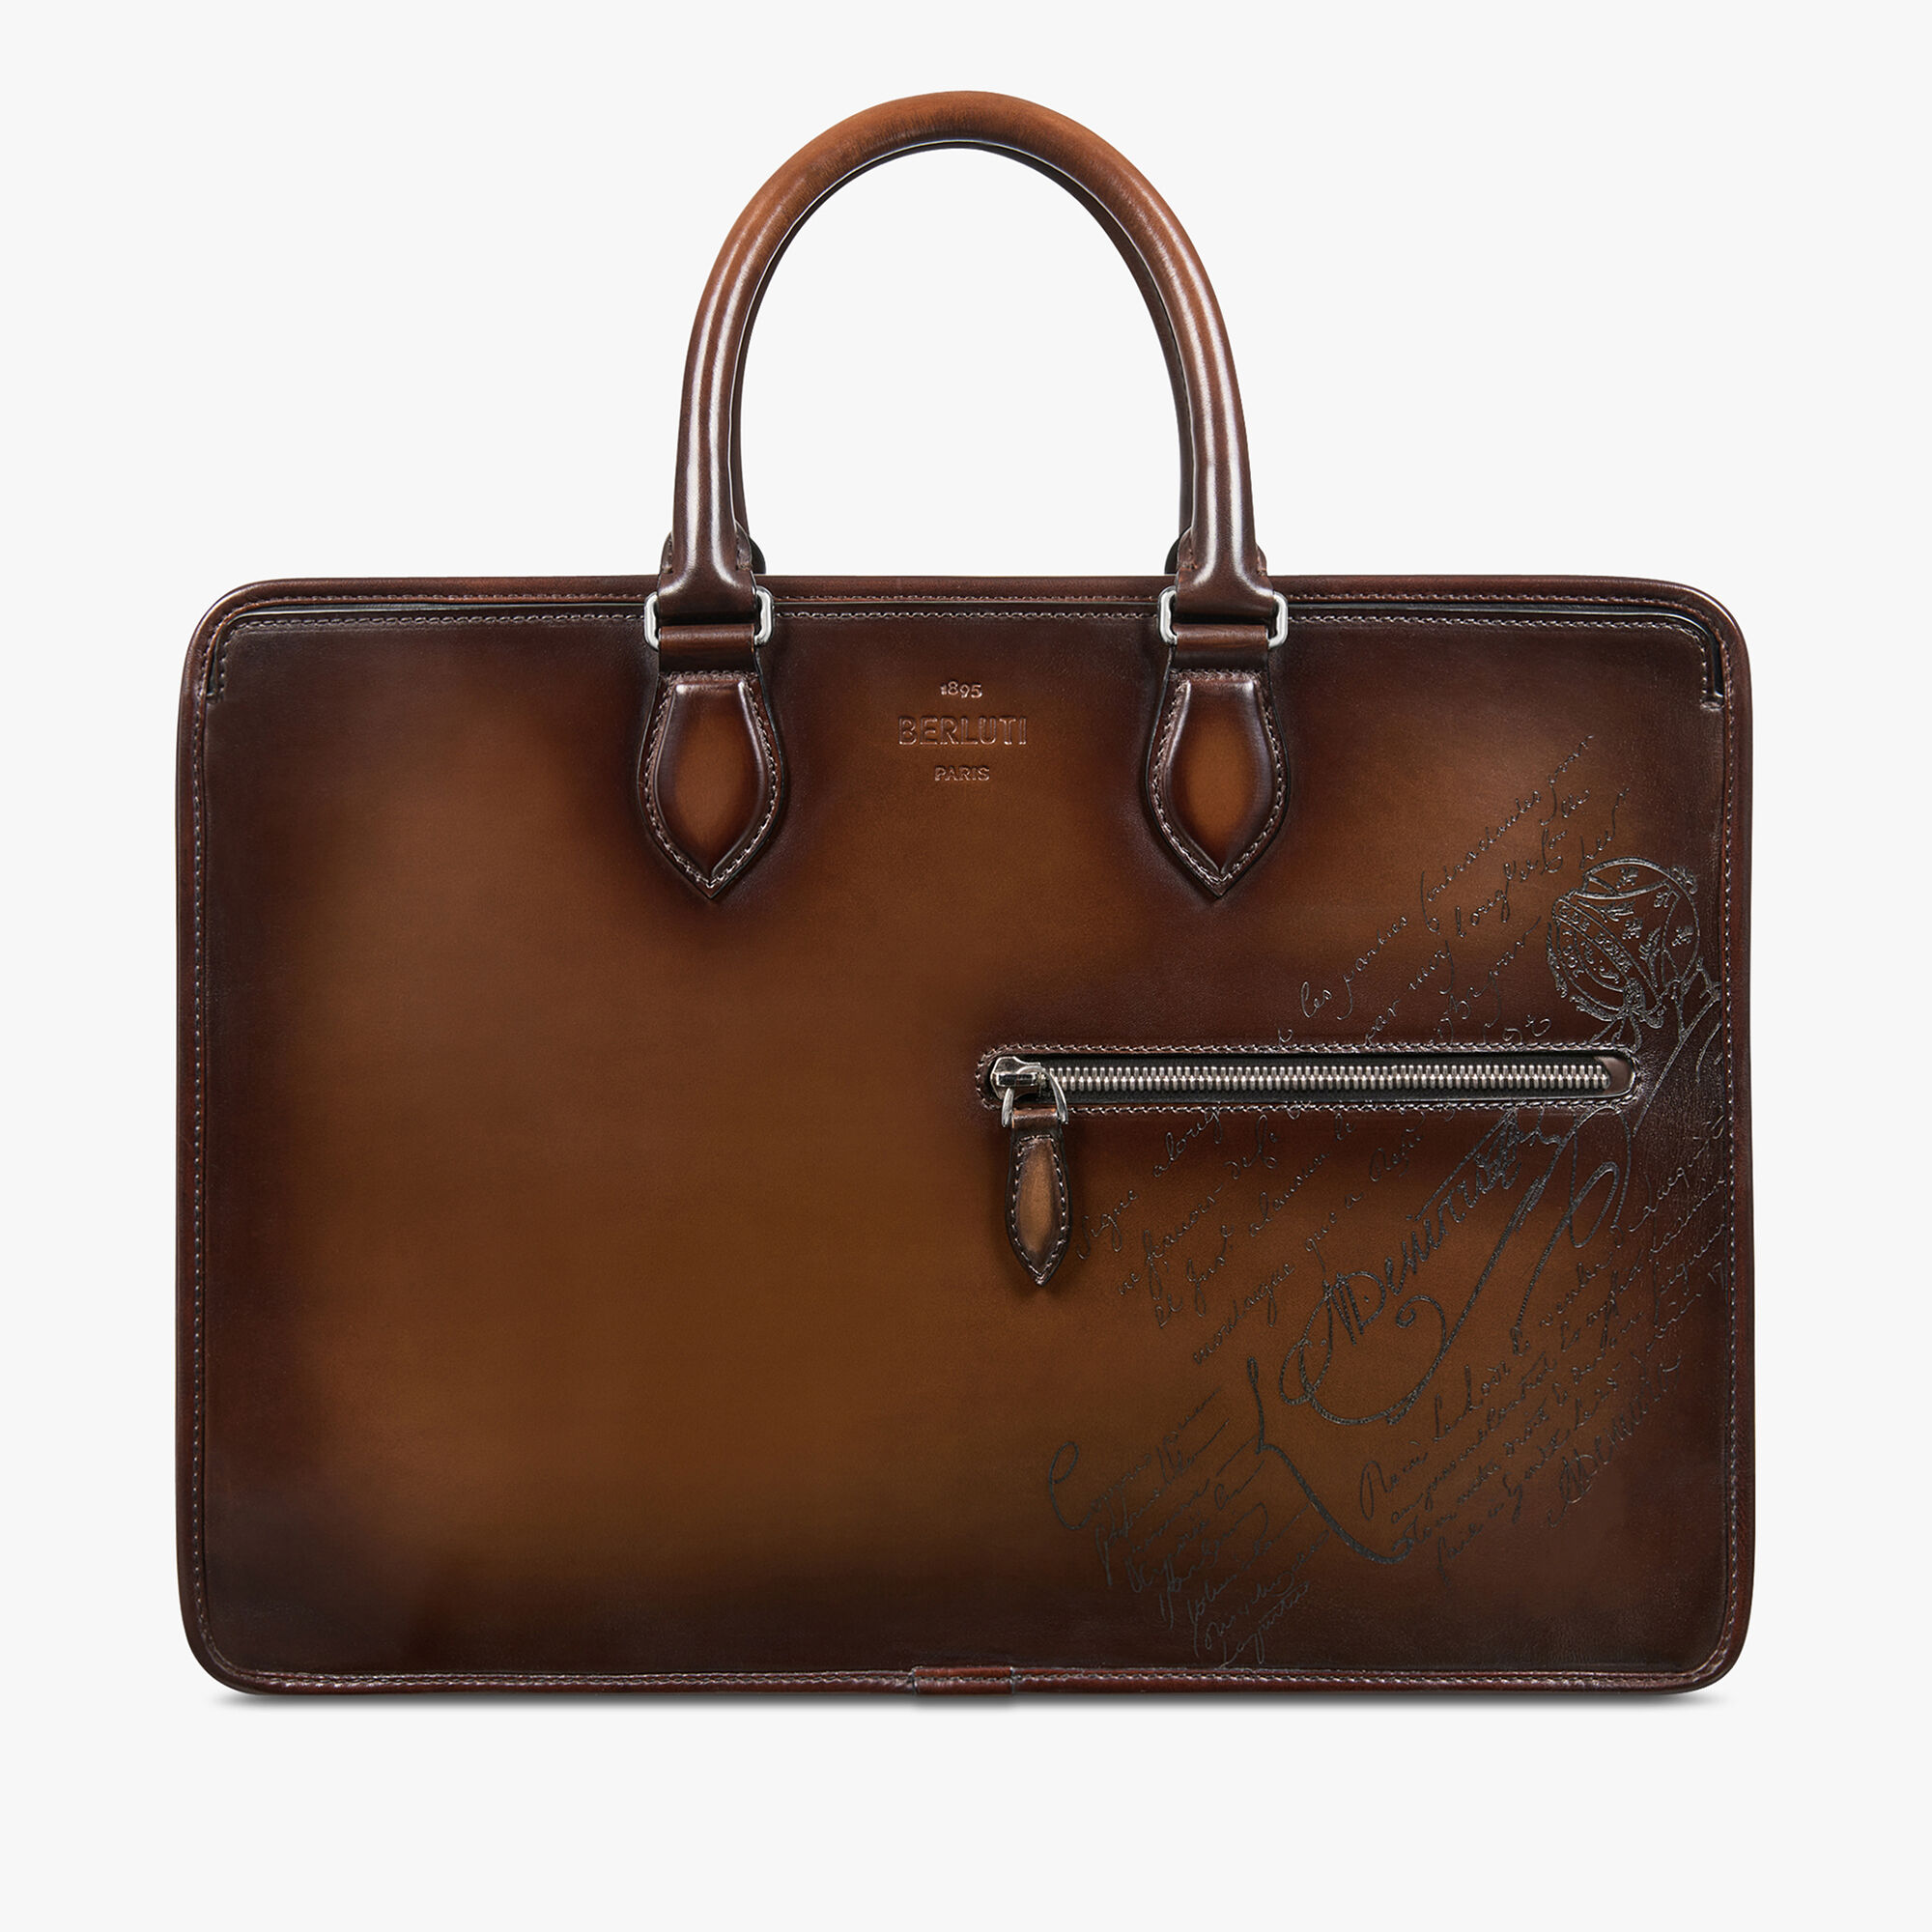 Bag collections by Berluti - US